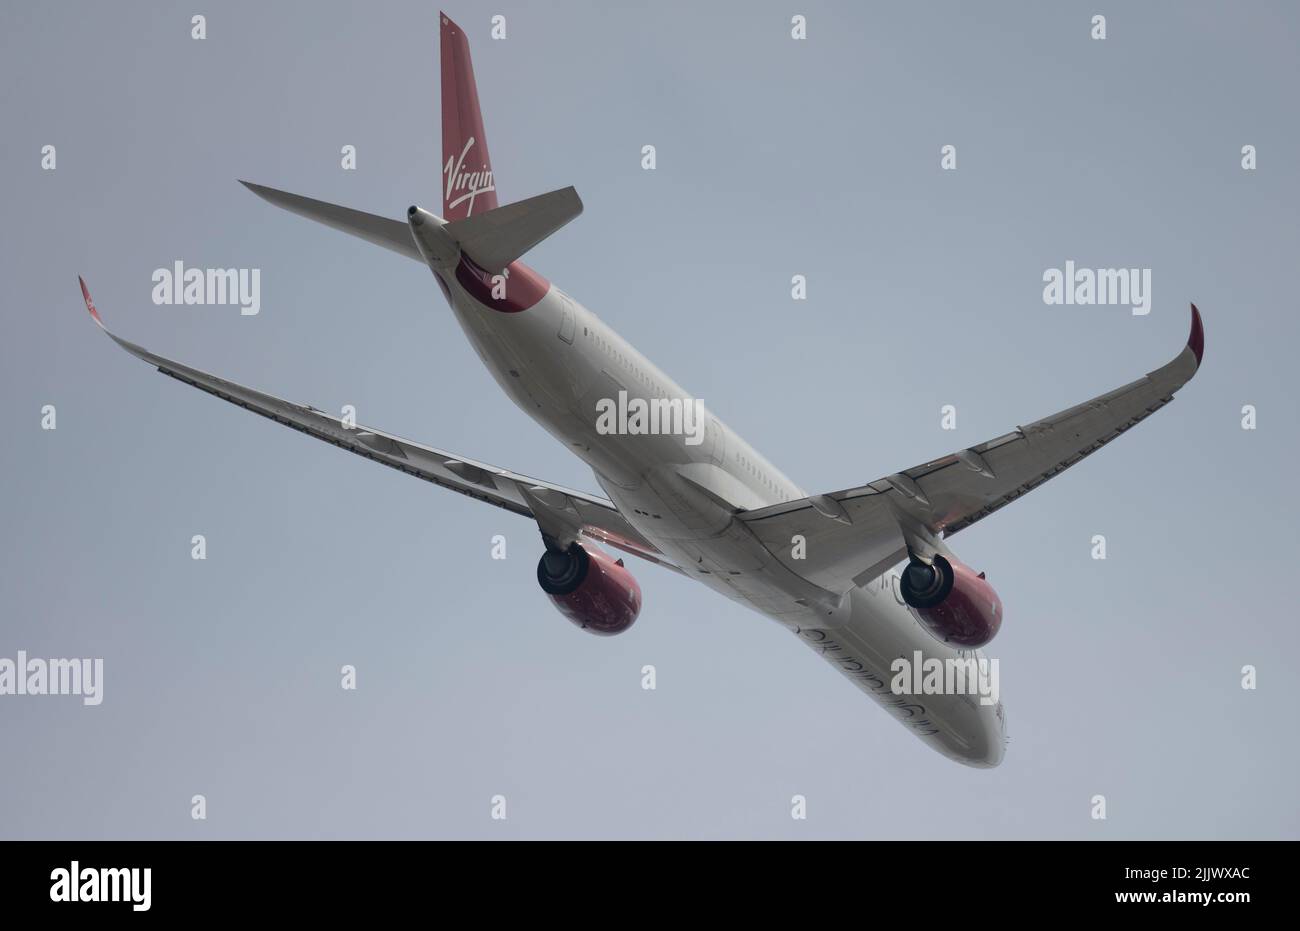 Heathrow Airport, London, UK. 28 July 2022. Virgin Atlantc Airbus A350 G-VRNB taking off from Southern runway at Heathrow on London to Orlando route Stock Photo